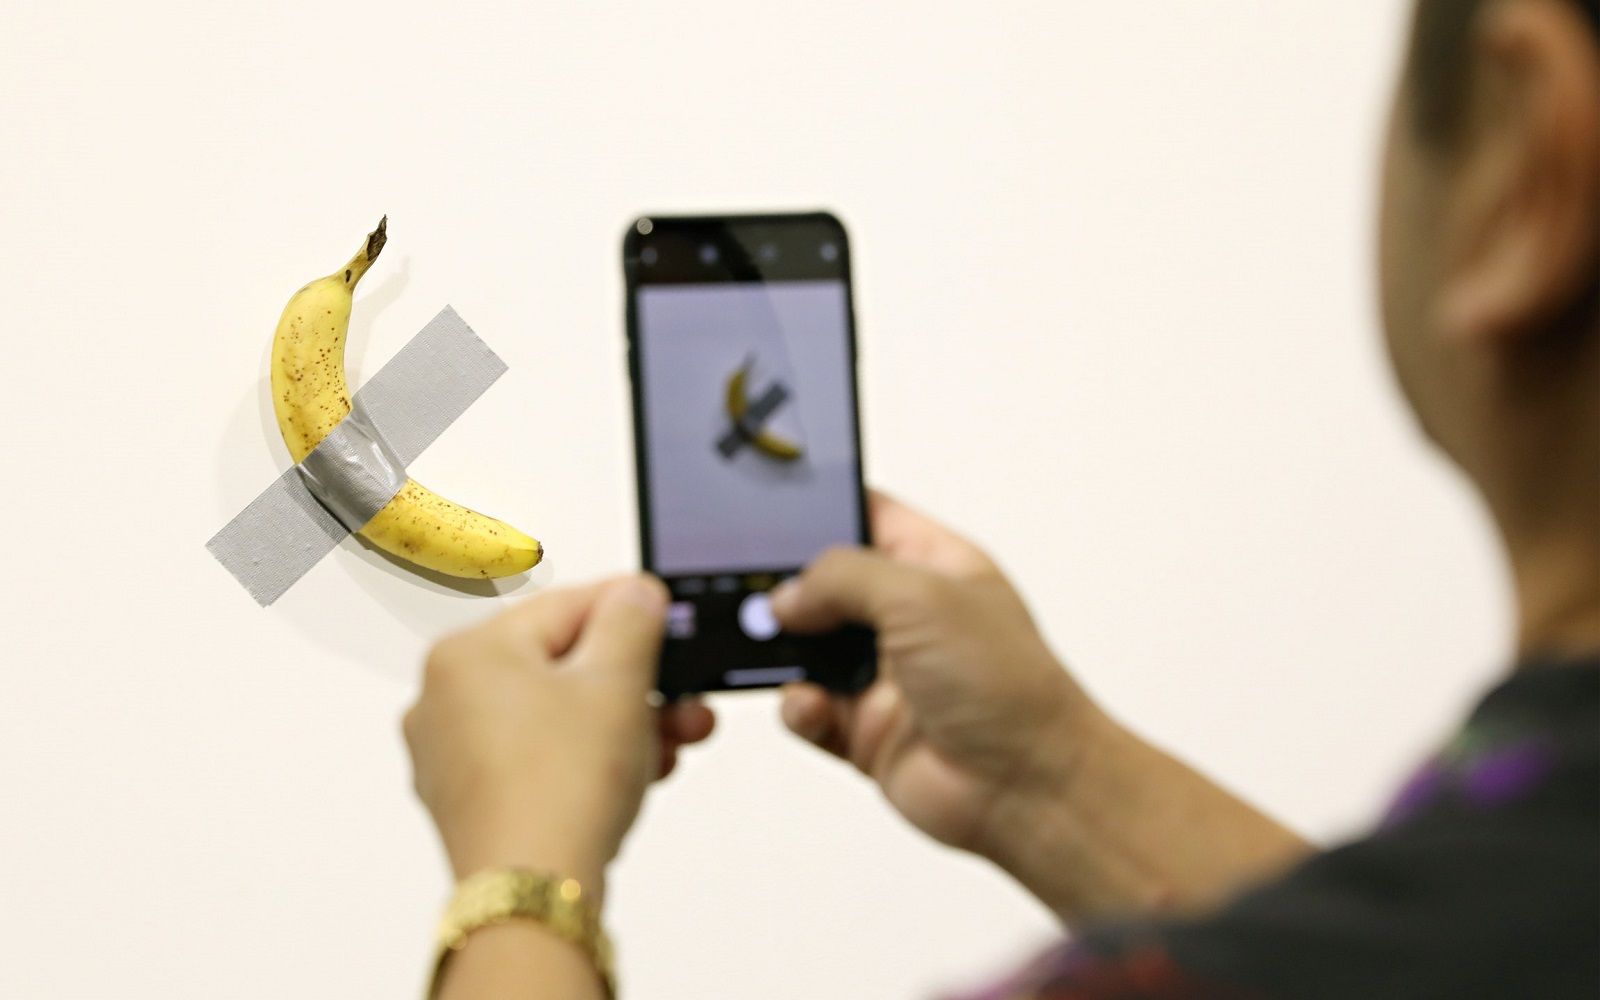 The complete history of Cattelan's duct-taped banana  The work was removed because it drew too large a crowd